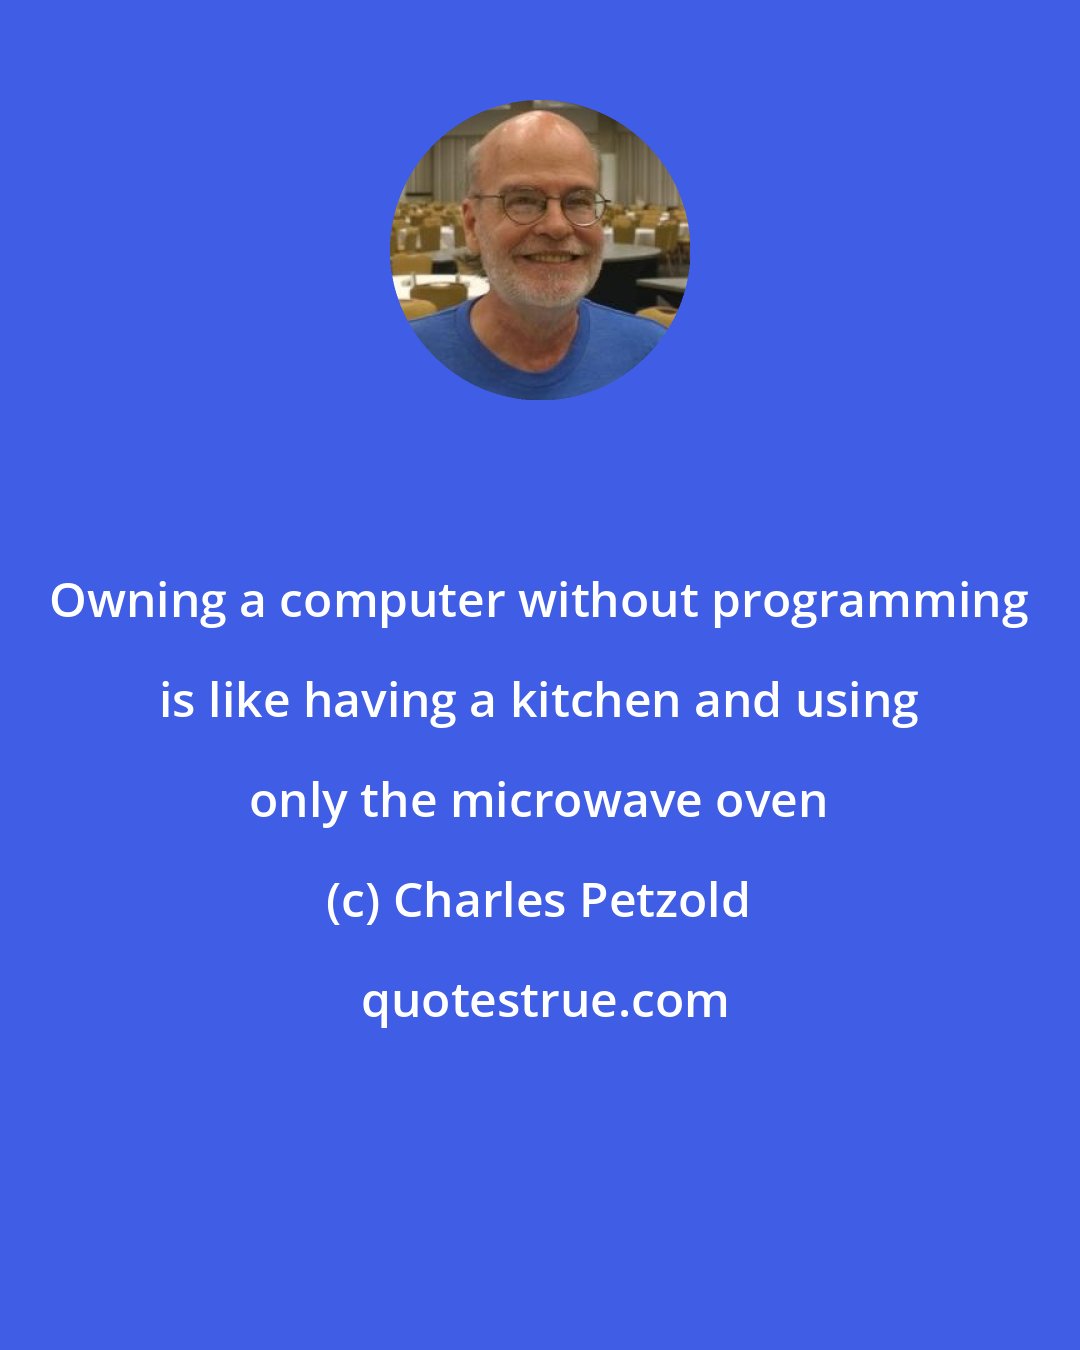 Charles Petzold: Owning a computer without programming is like having a kitchen and using only the microwave oven